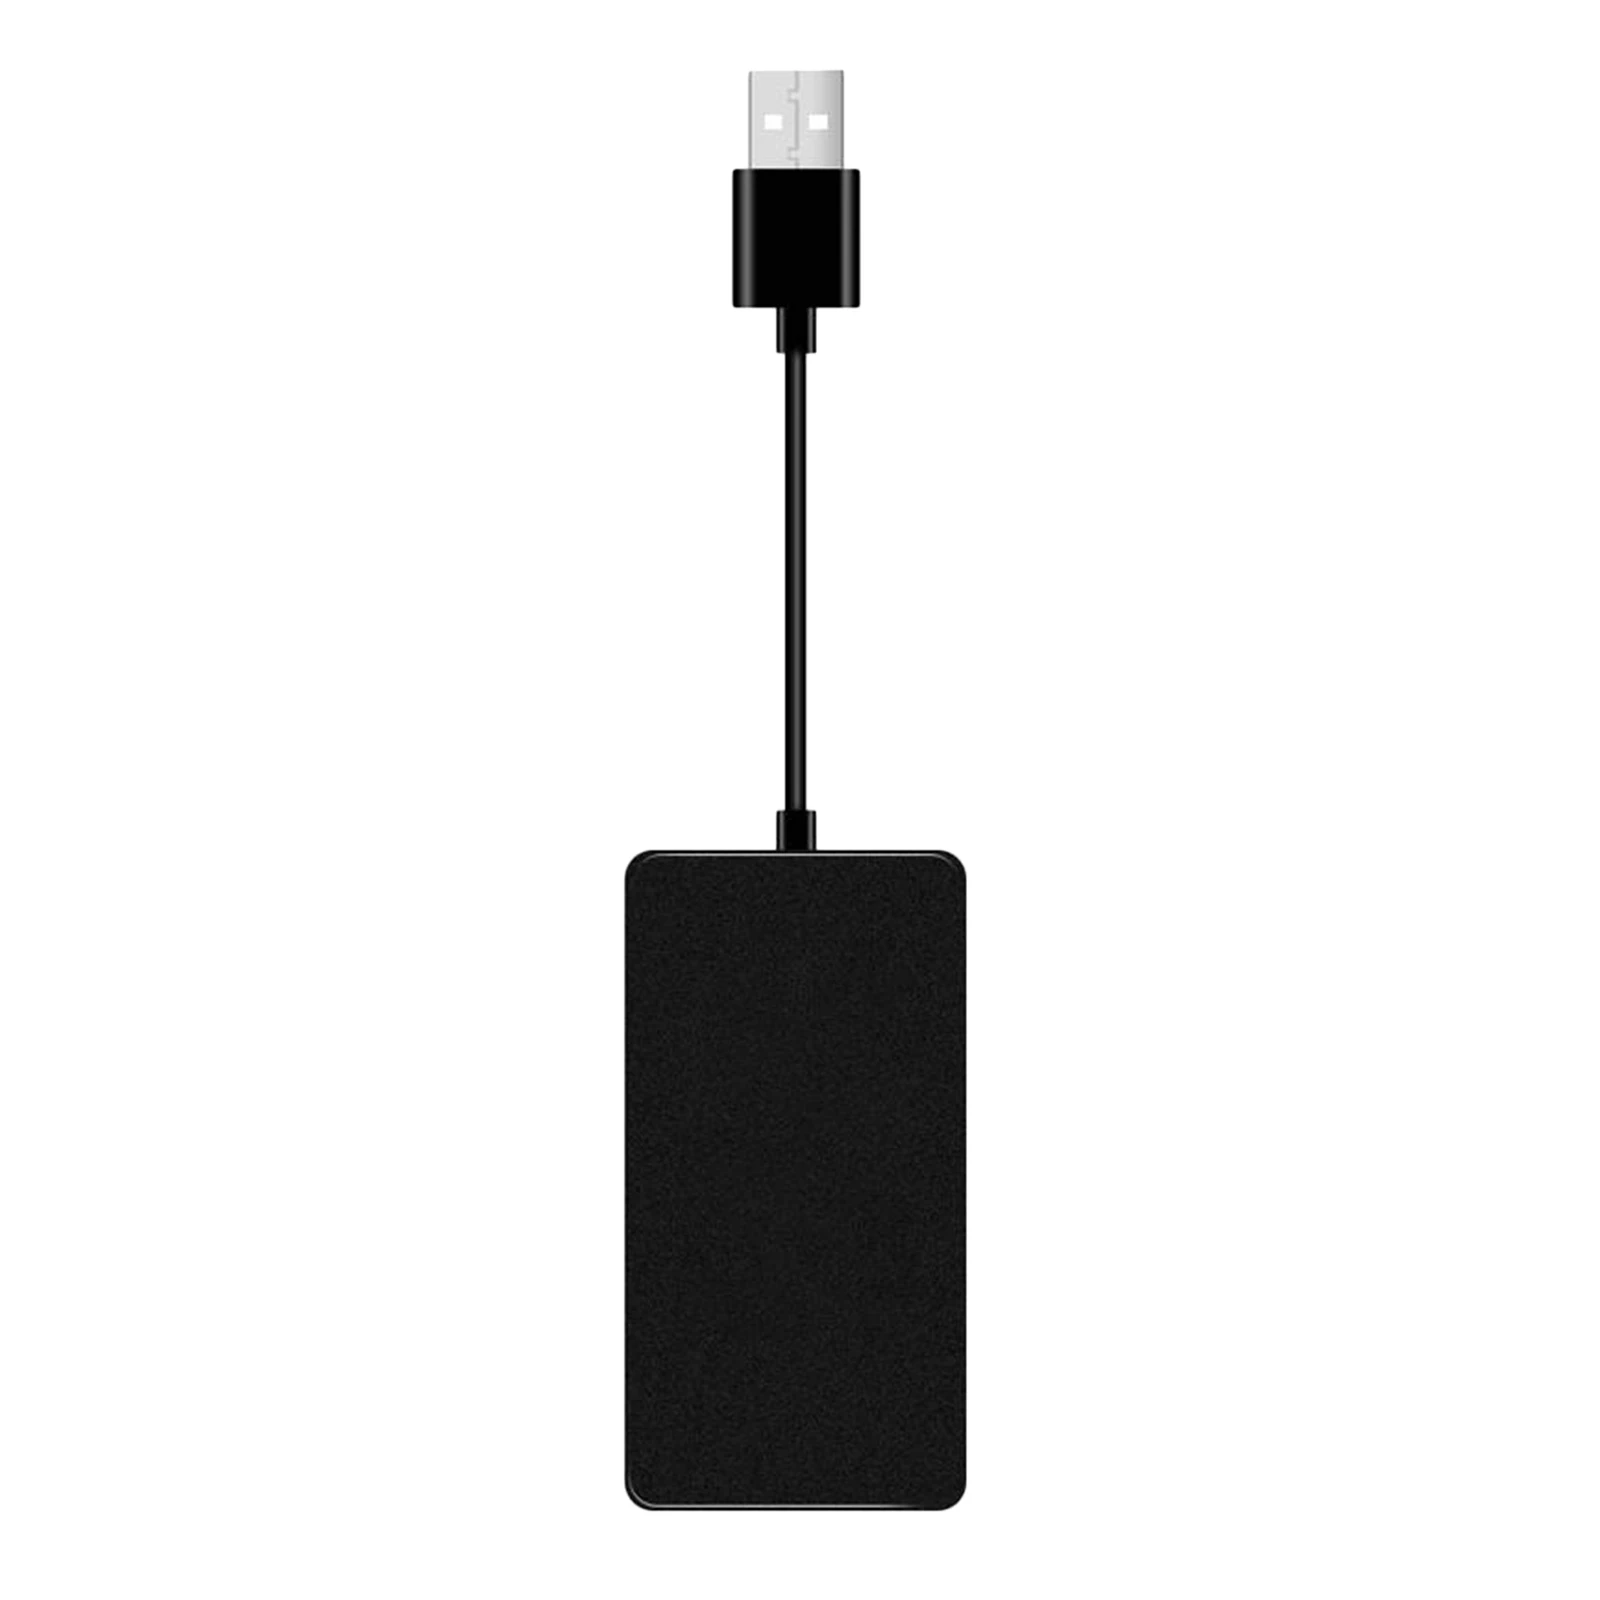 HD Auto Wireless  Dongle for IOS  GPS Auto Navigation Player